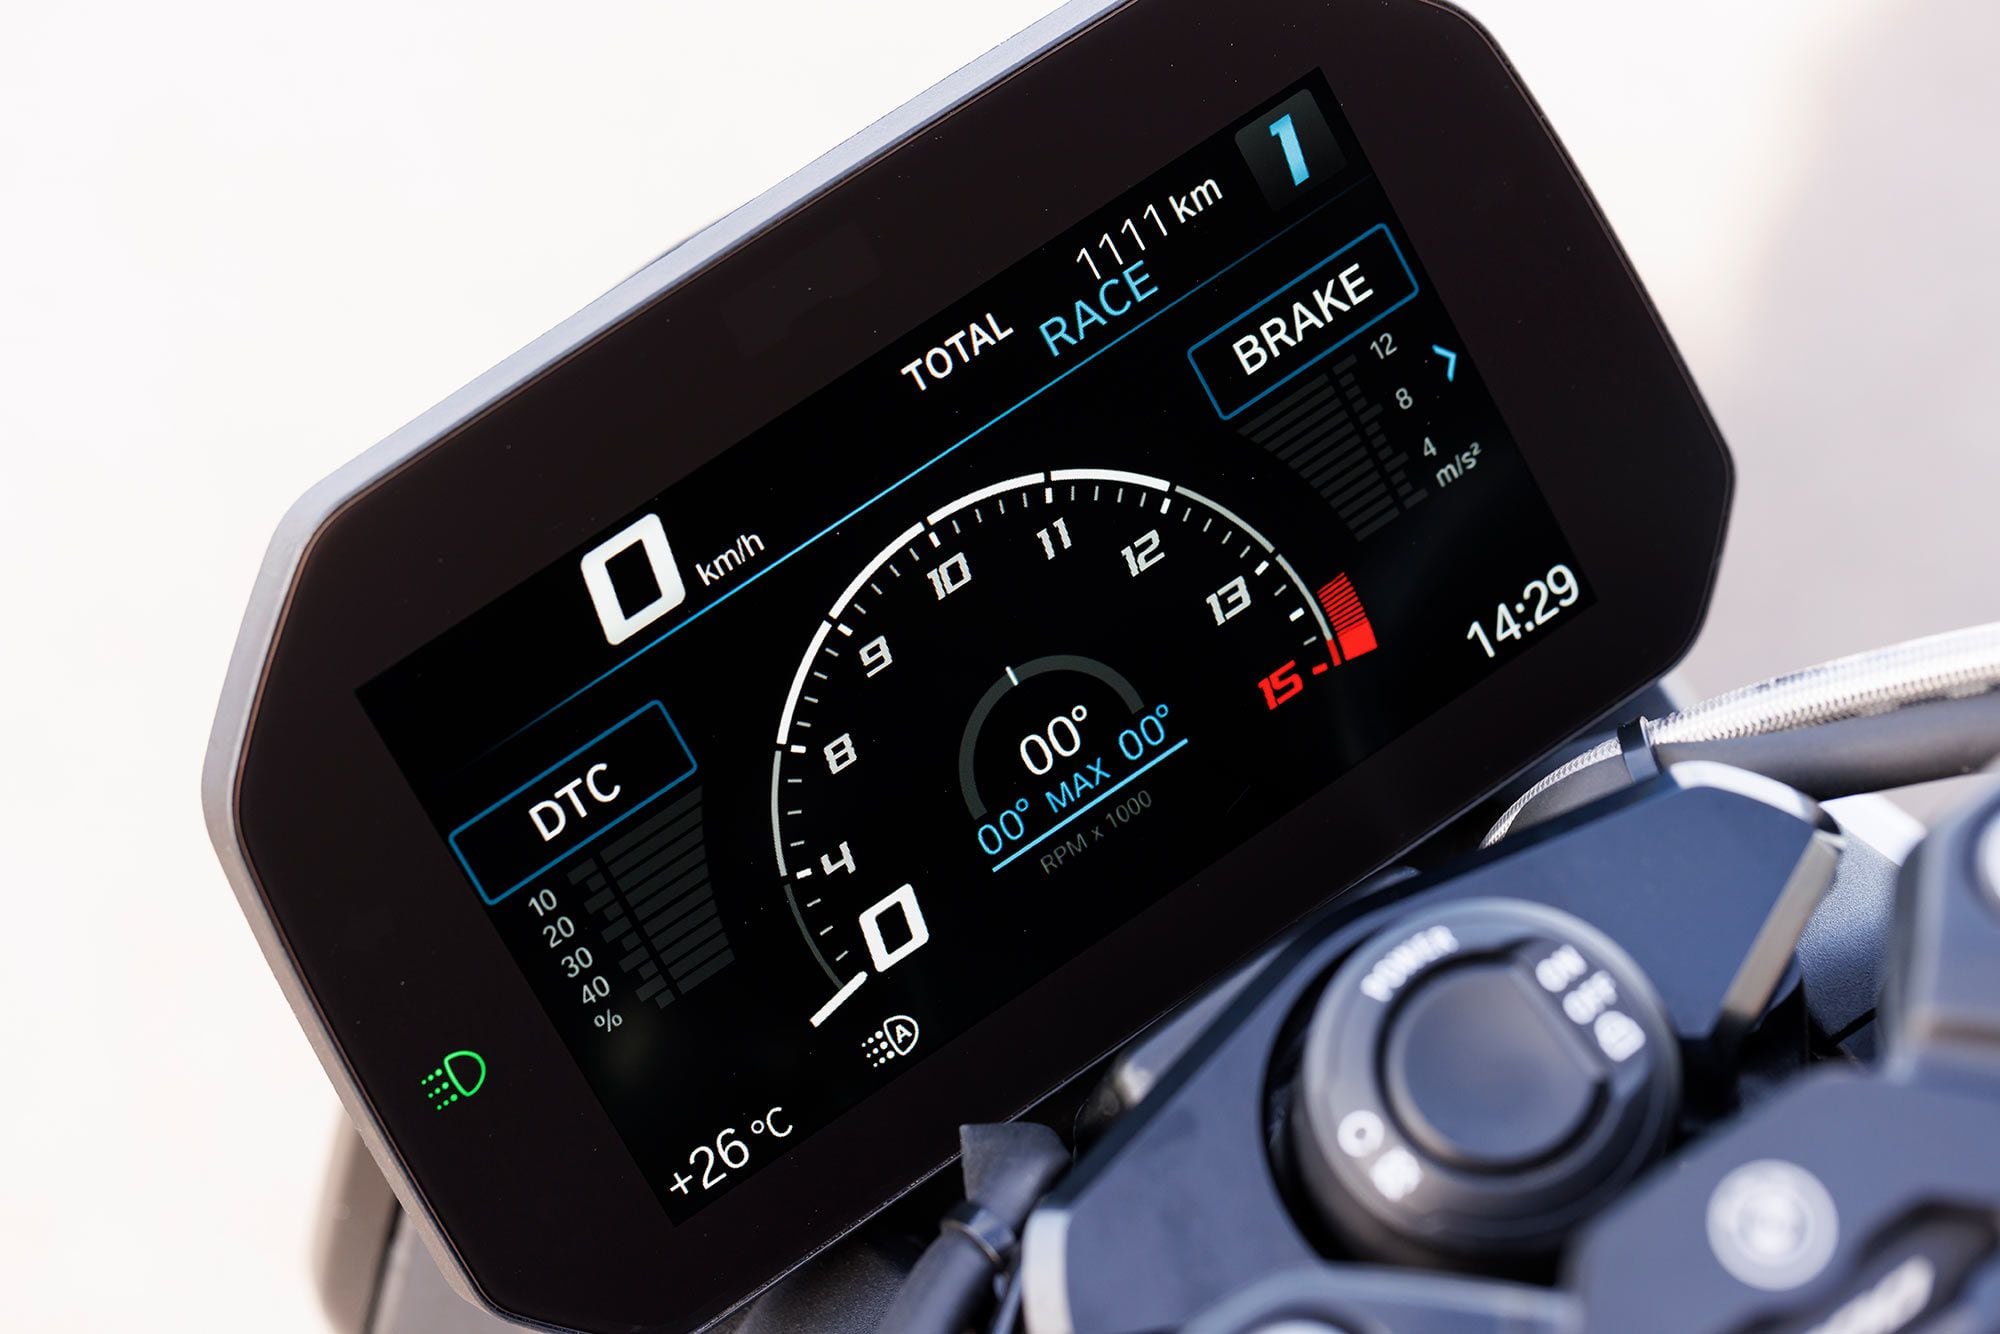 The same informative 6.5-inch dash remains, with the BMW navigation wheel on the left side.